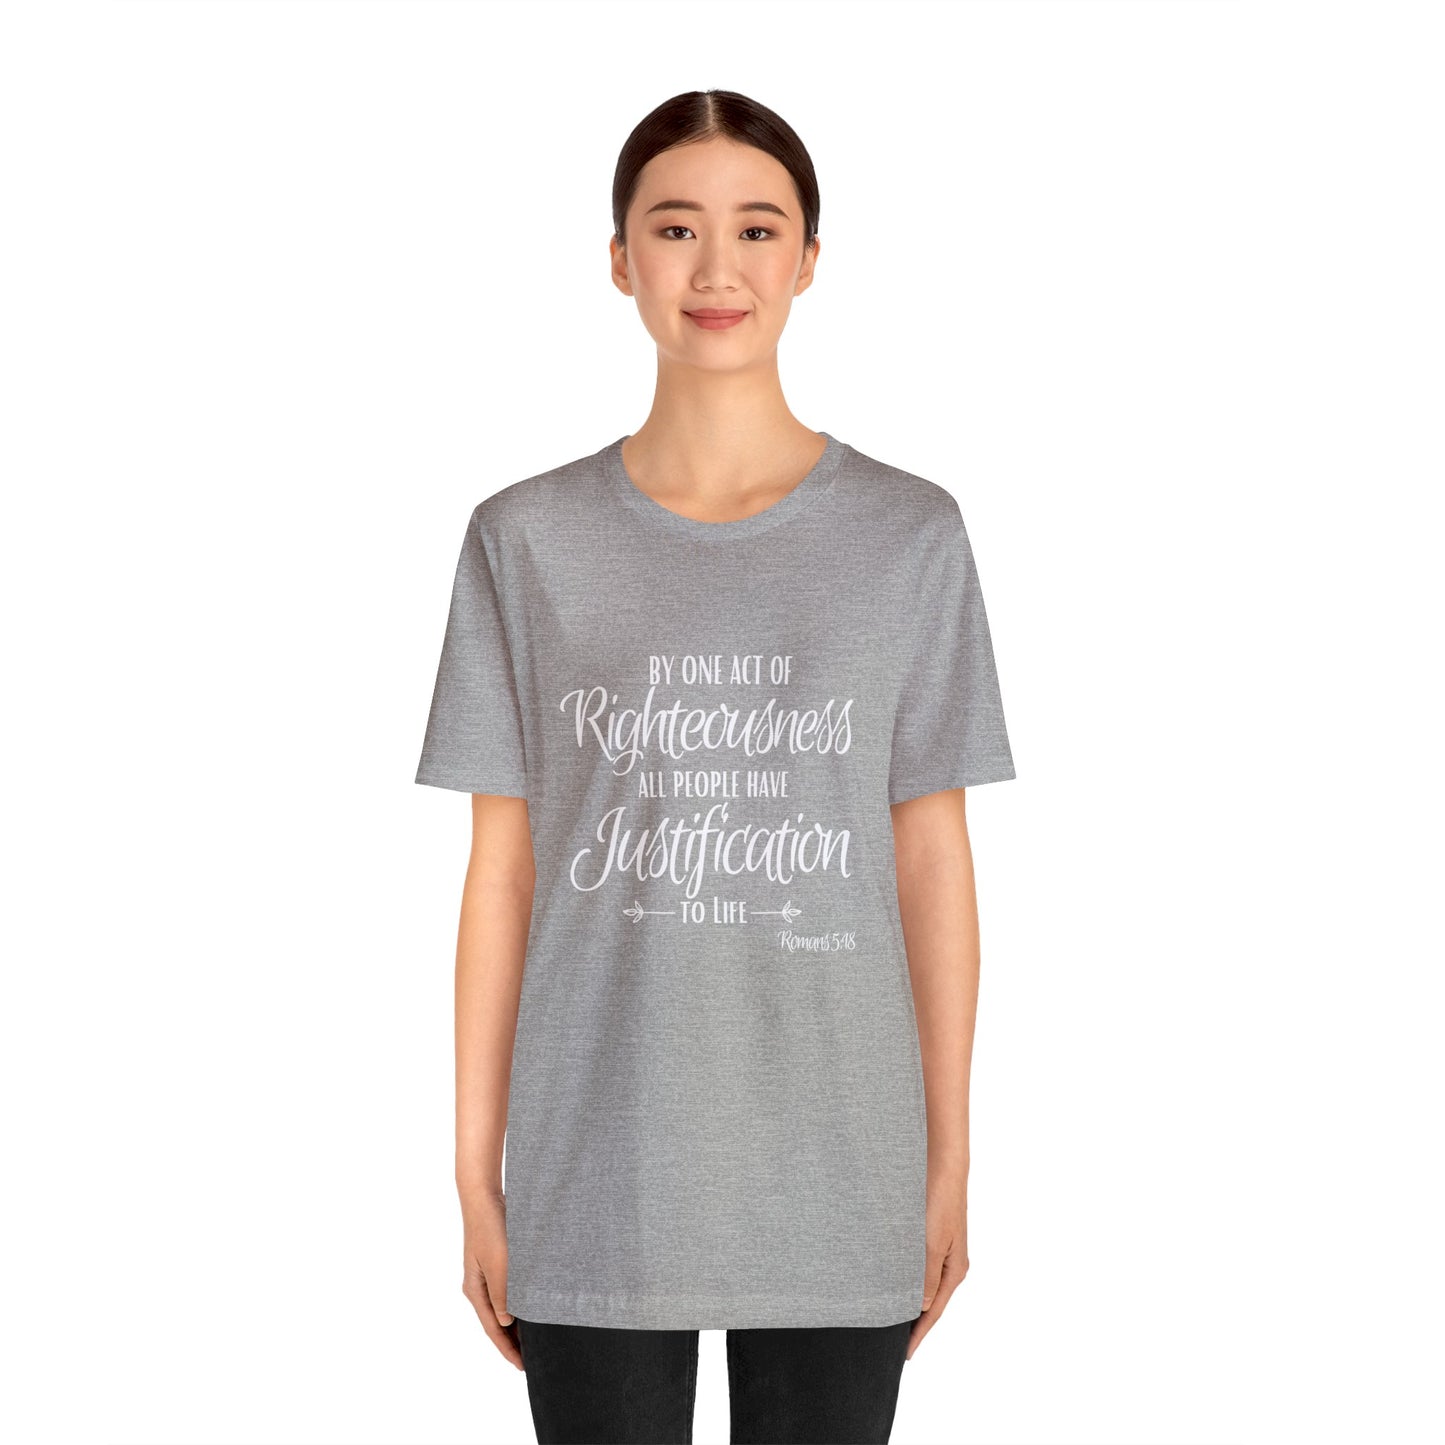 Romans 5:18, Express Delivery, Christian T-shirt for Men and Women